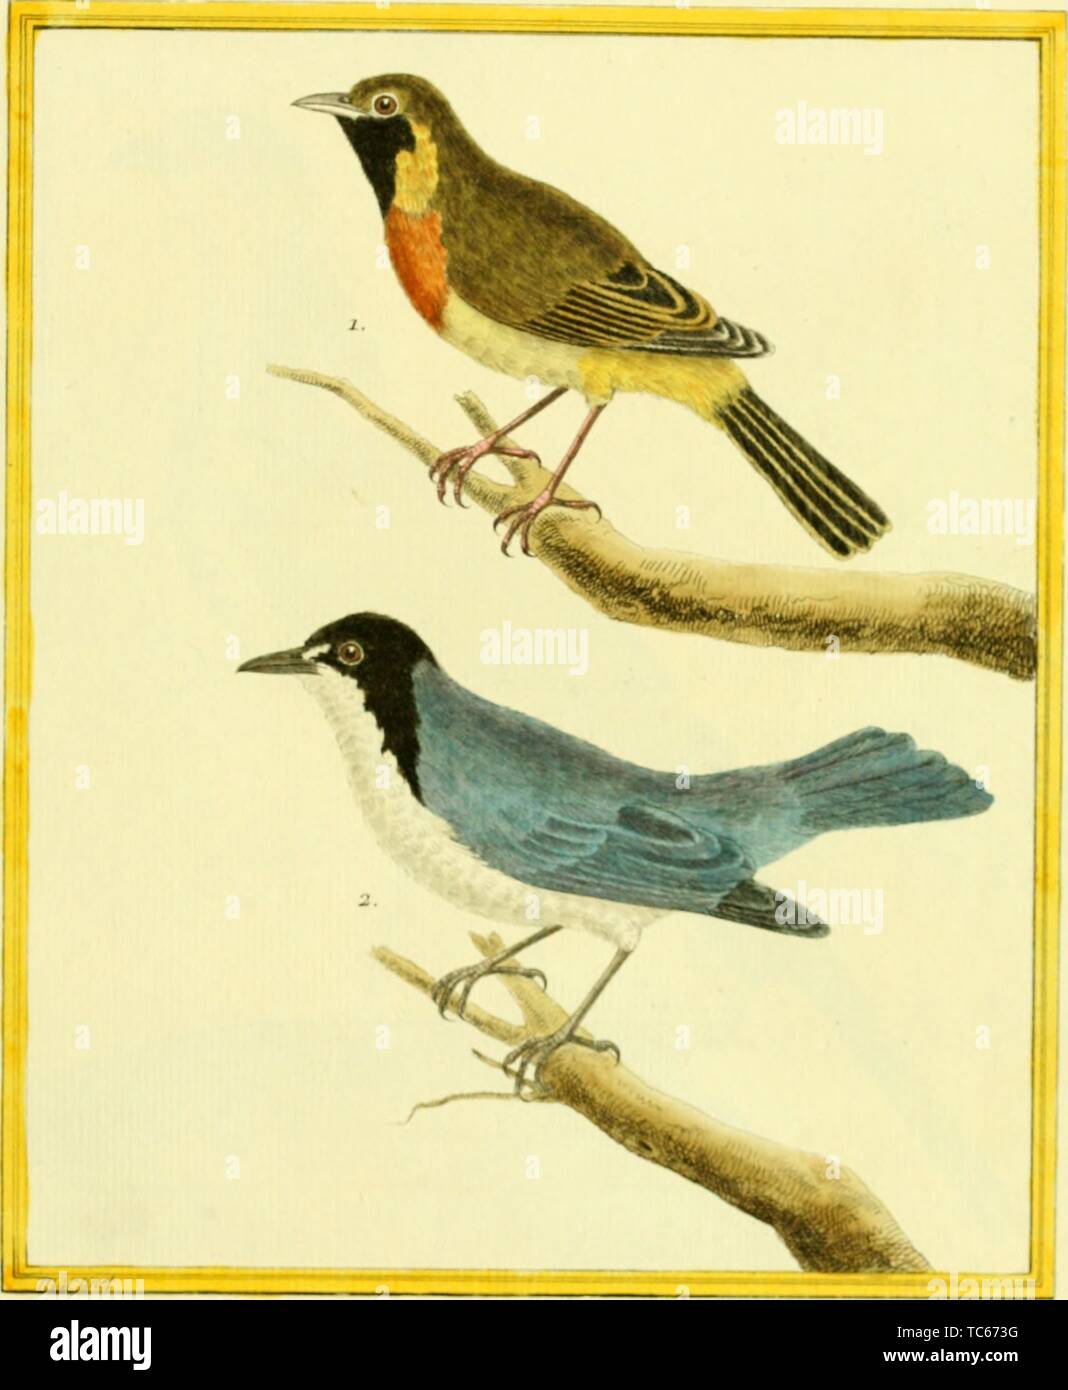 Engraved drawings of the Olive Tanager (Chlorothraupis carmioli) and Hooded Tanager (Nemosia pileata), from the book 'Planches enluminees Dhistoire naturelle' by Francois Nicolas, Louis Jean Marie Daubenton, and Edme-Louis Daubenton, 1765. Courtesy Internet Archive. () Stock Photo